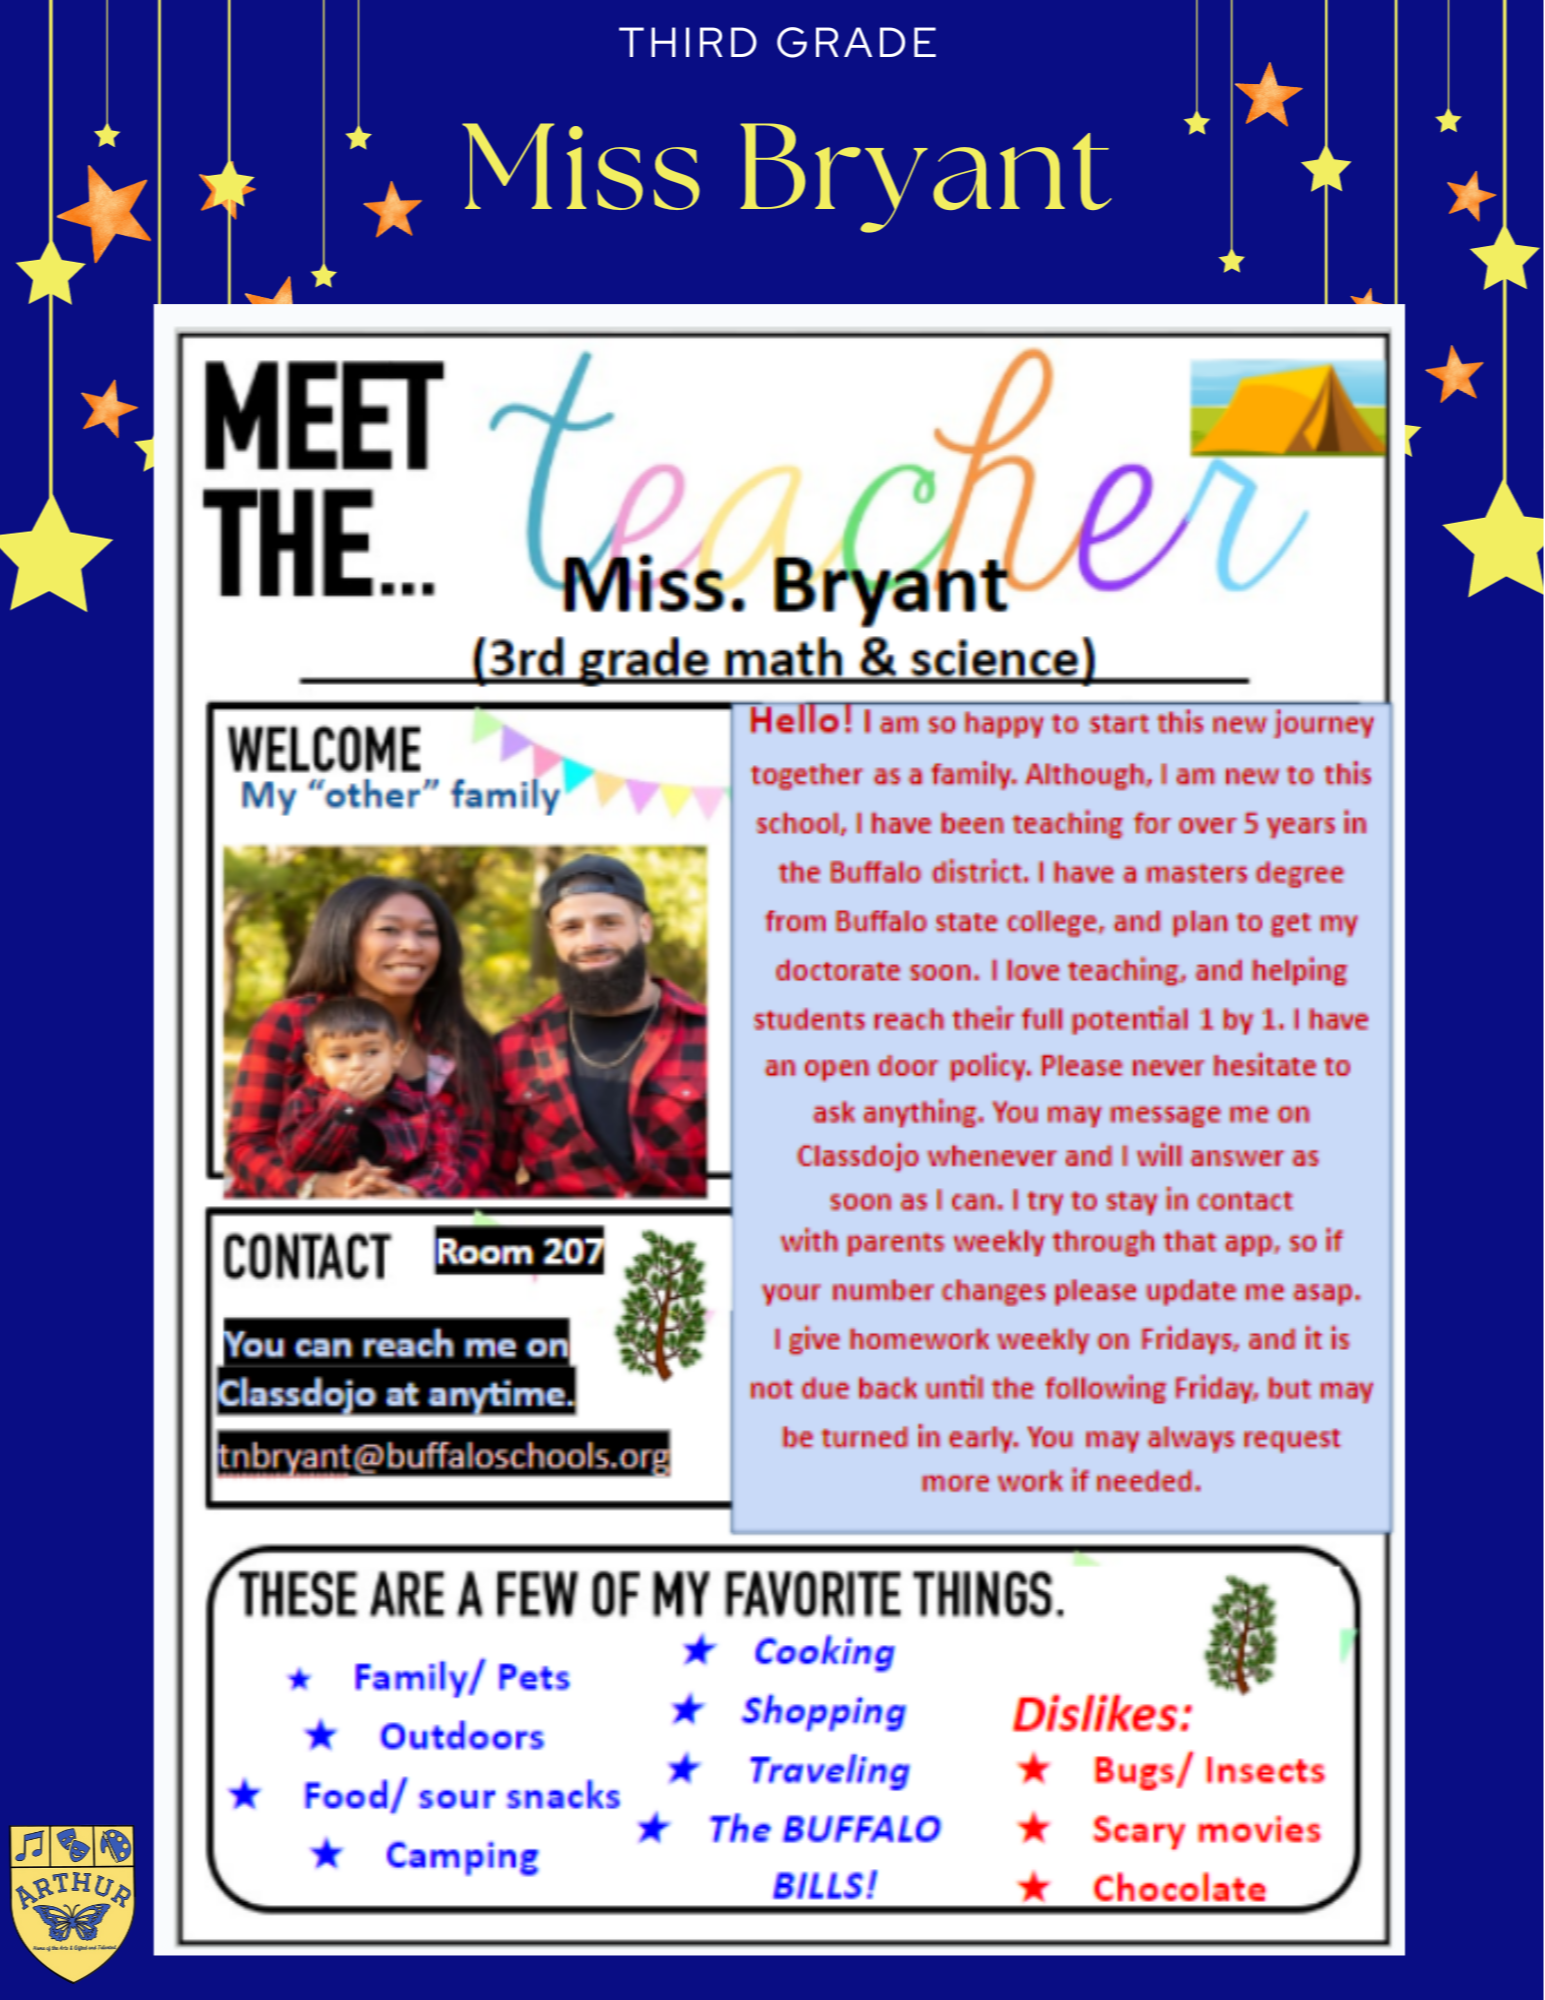 Miss Bryant pic-Info is typed underneath